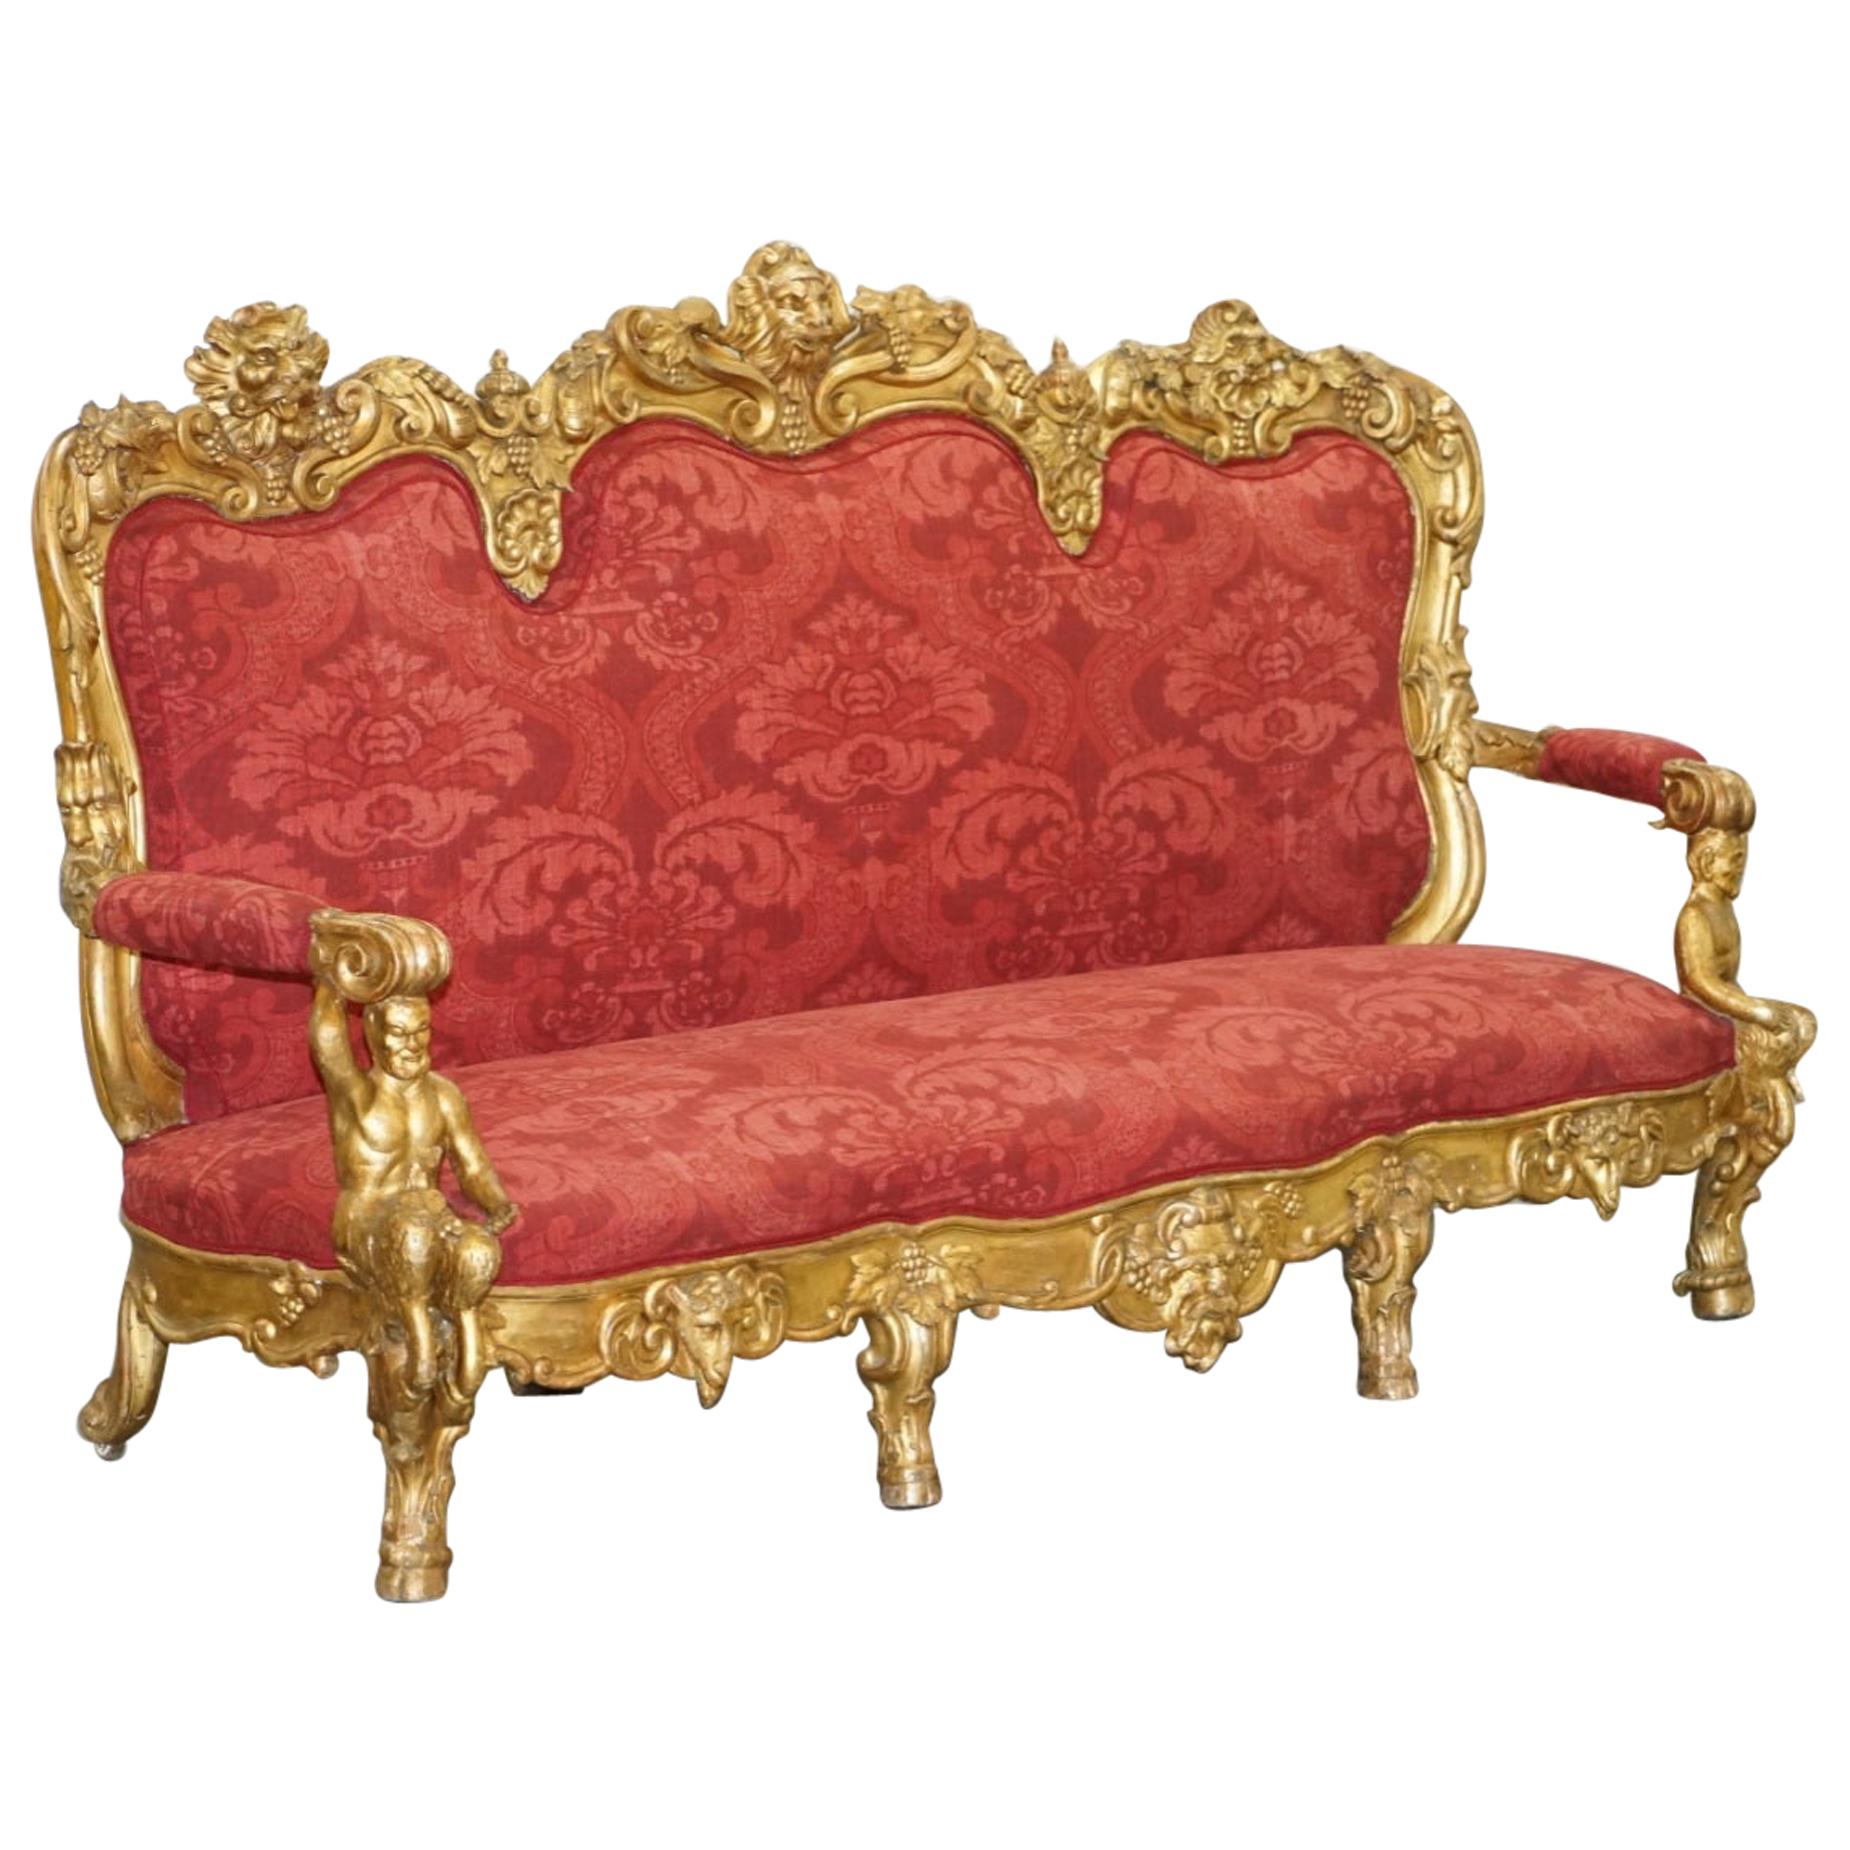 Sublime Hand Carved circa 1860 Paris France Baroque Gold Giltwood Settee Sofa